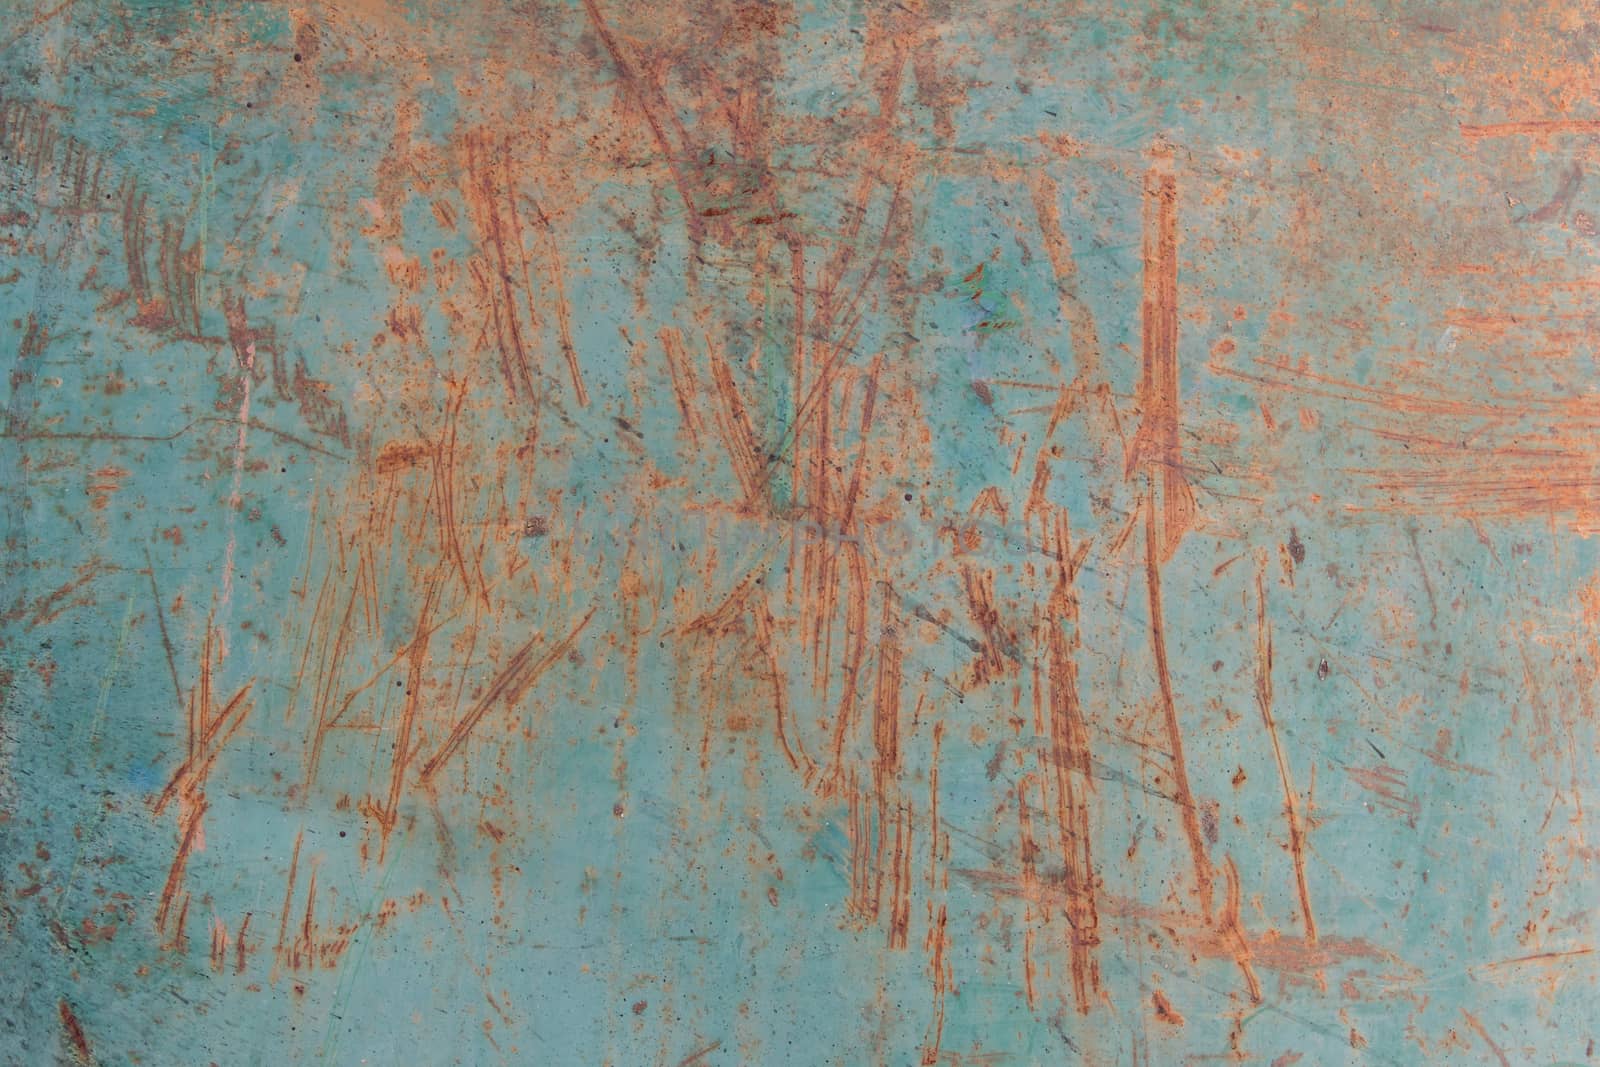 Rusty metal grunge background and scratch texture